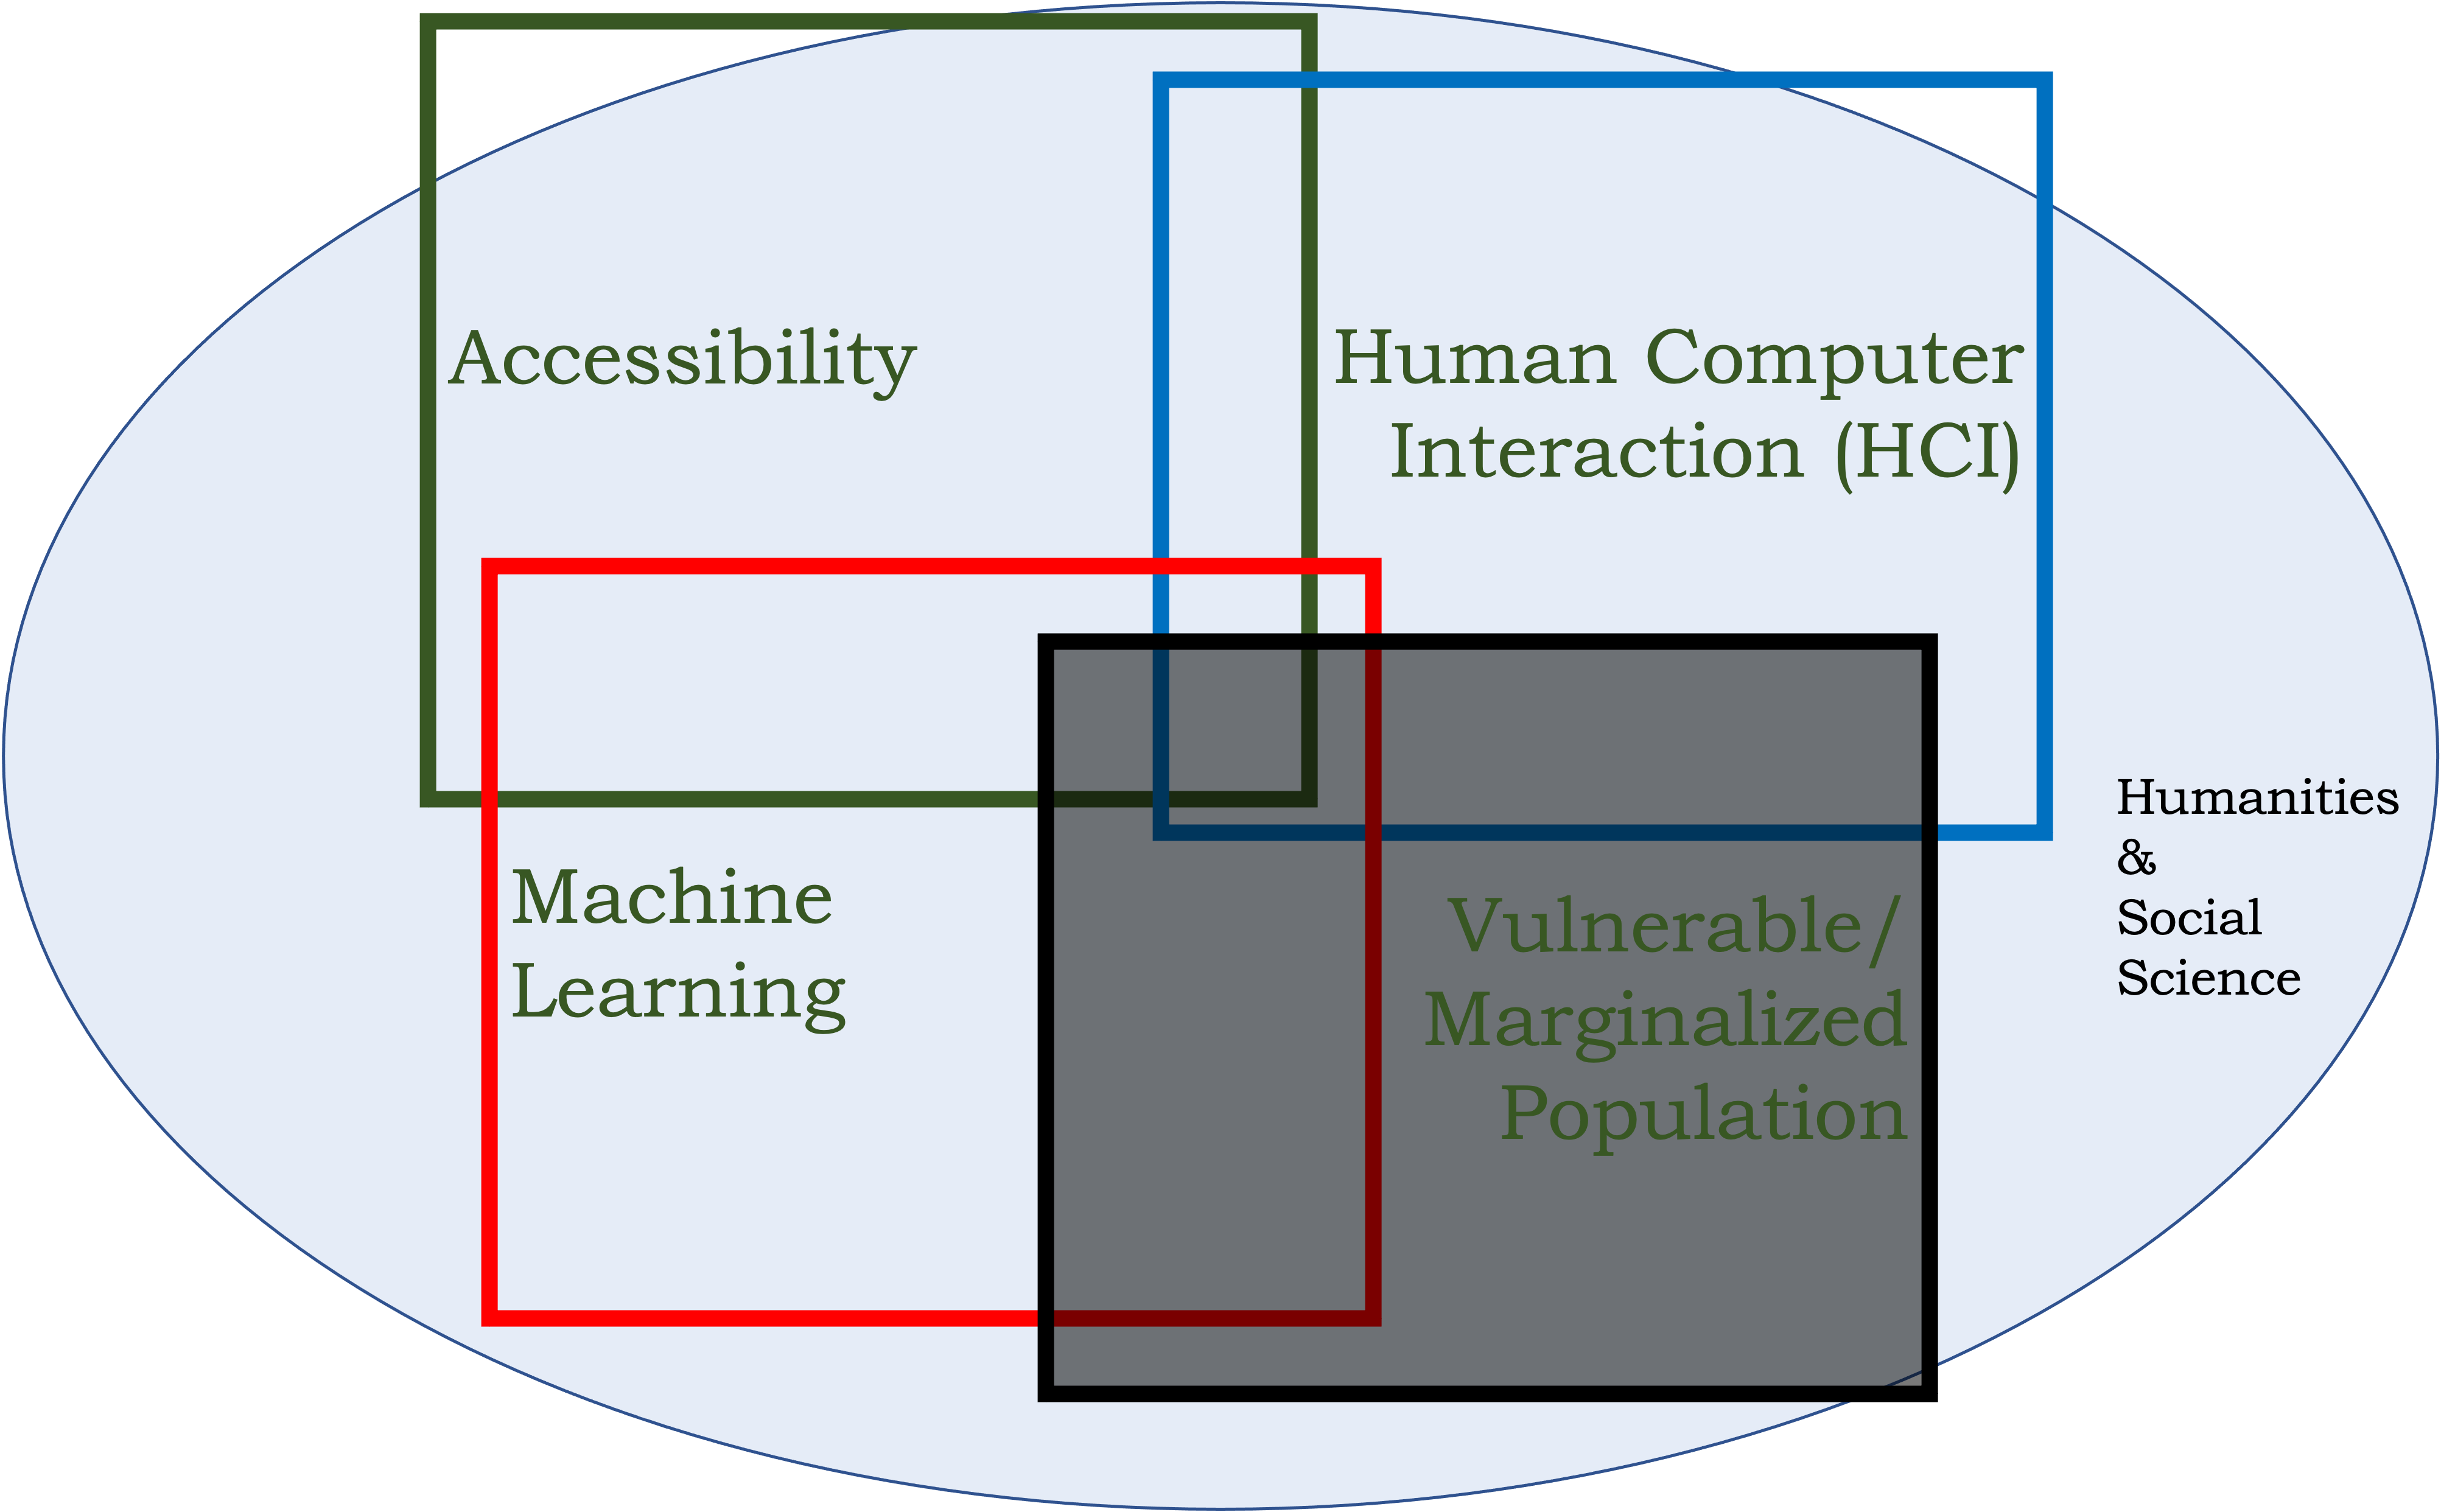 A Venn-diagram-like image with four intersecting squares. The squares represent security, safety, human computer interaction, and marginalized/vulnerable populations. There is a circle behind the venn diagram of squares that represents ideas from the humanities and social sciences that the lab uses to address problems. The image represents the main area of research that the ASSET lab does.